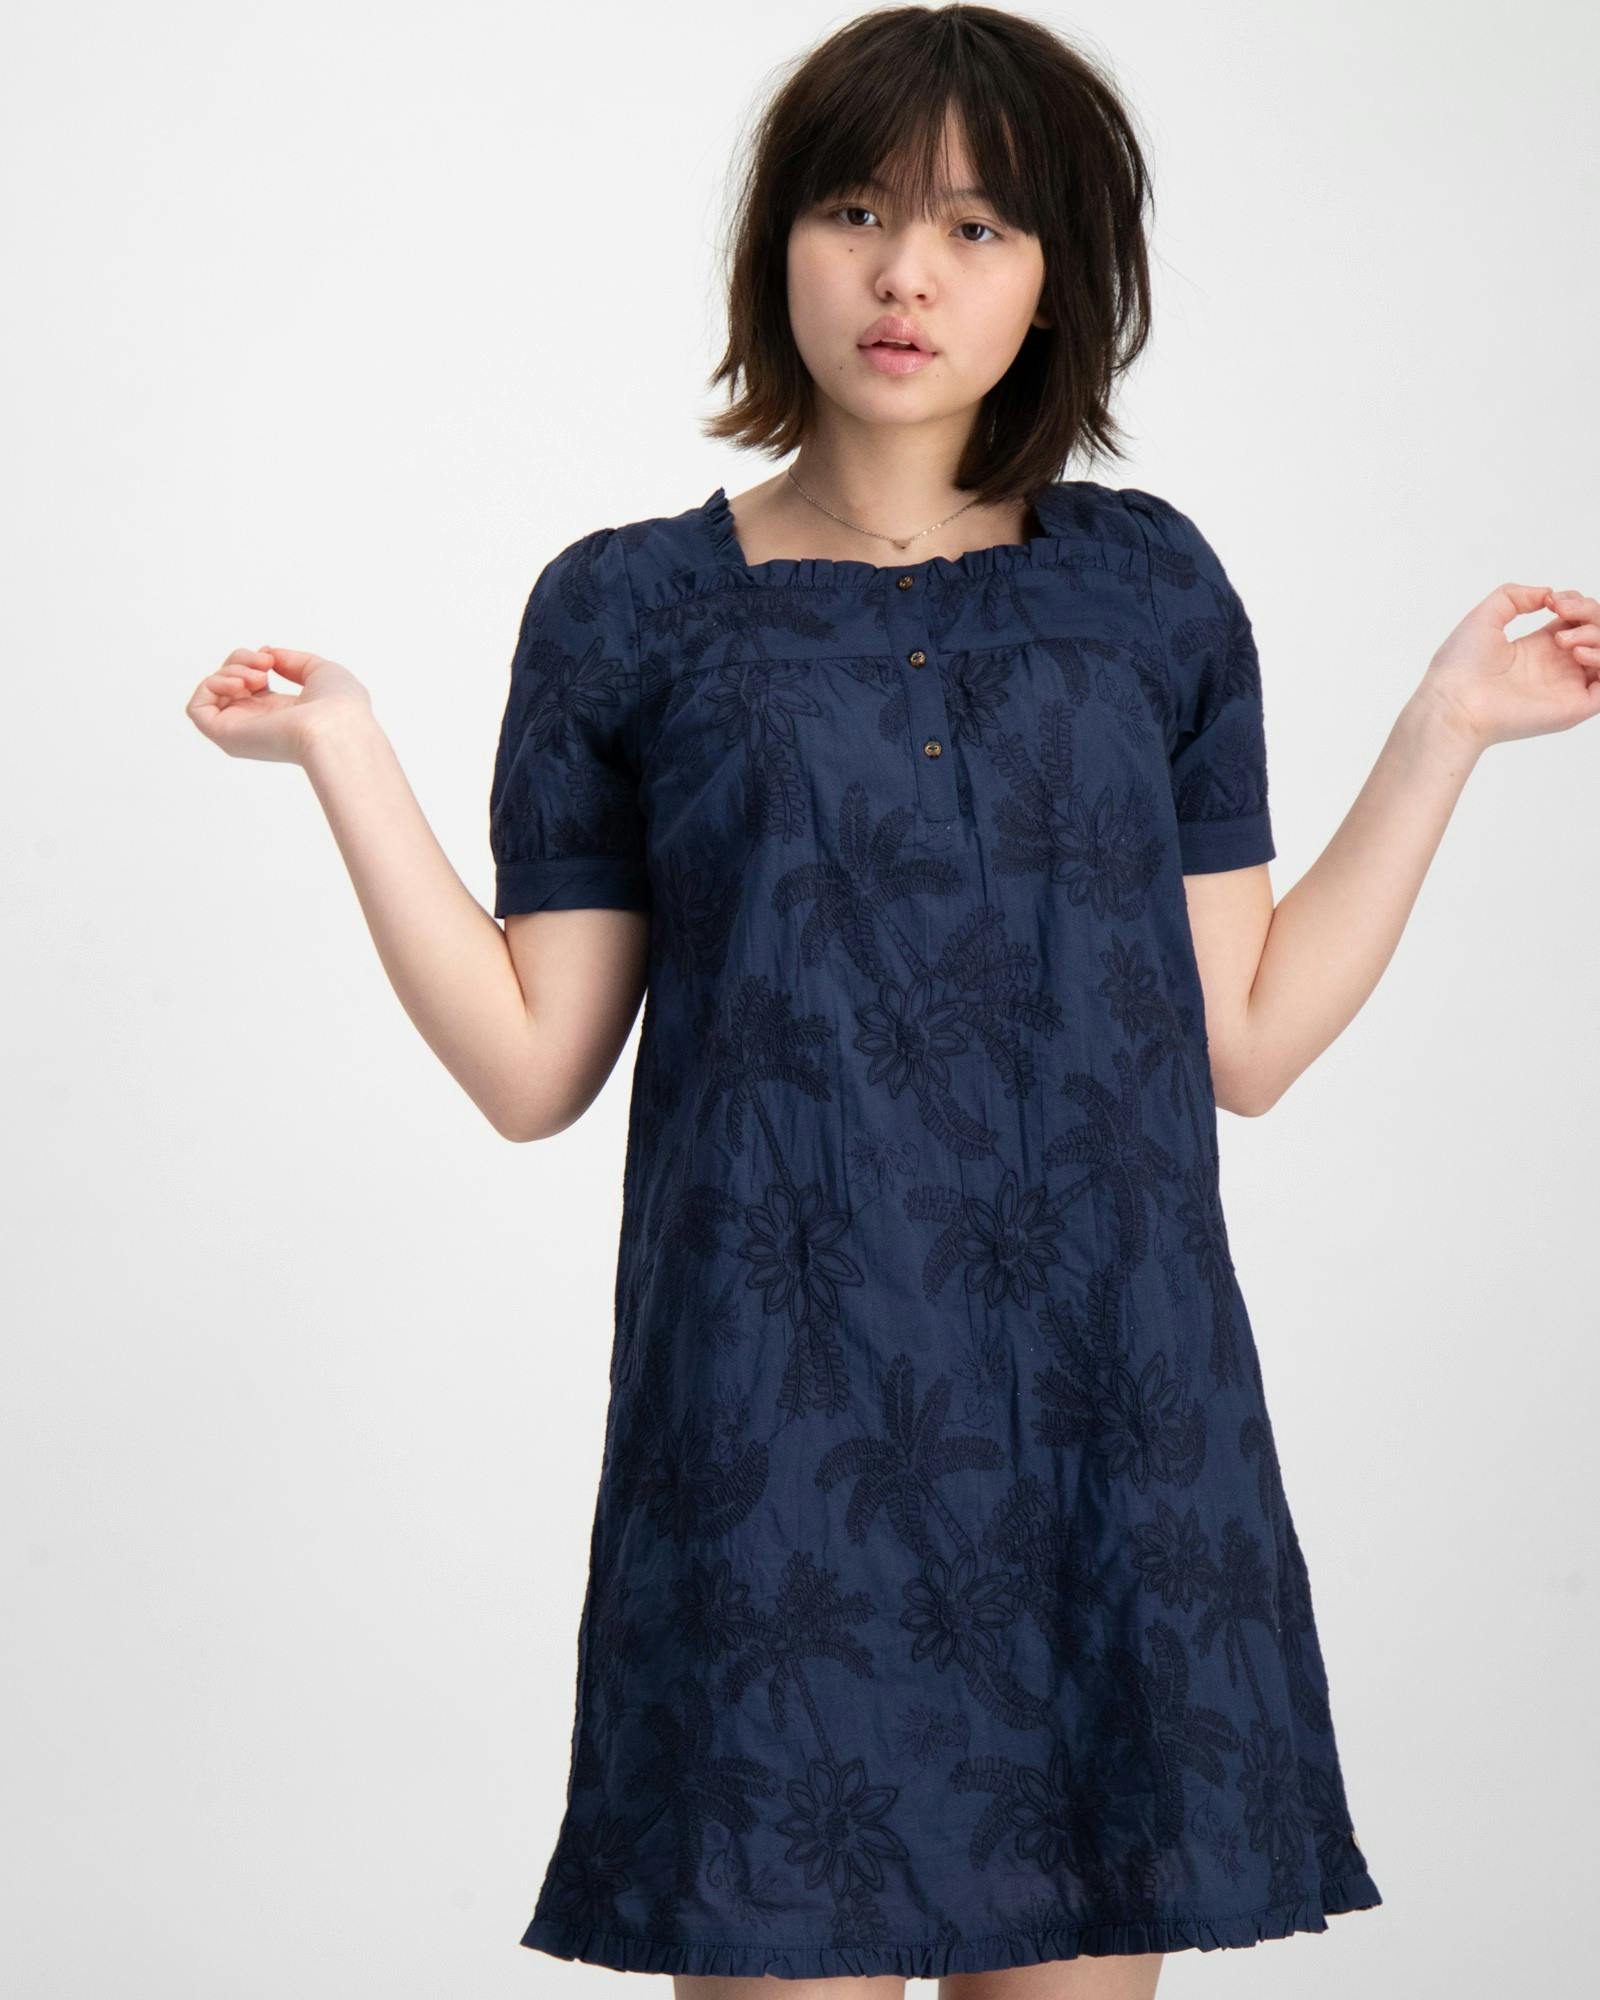 Tonal embroidered short-sleeved dress